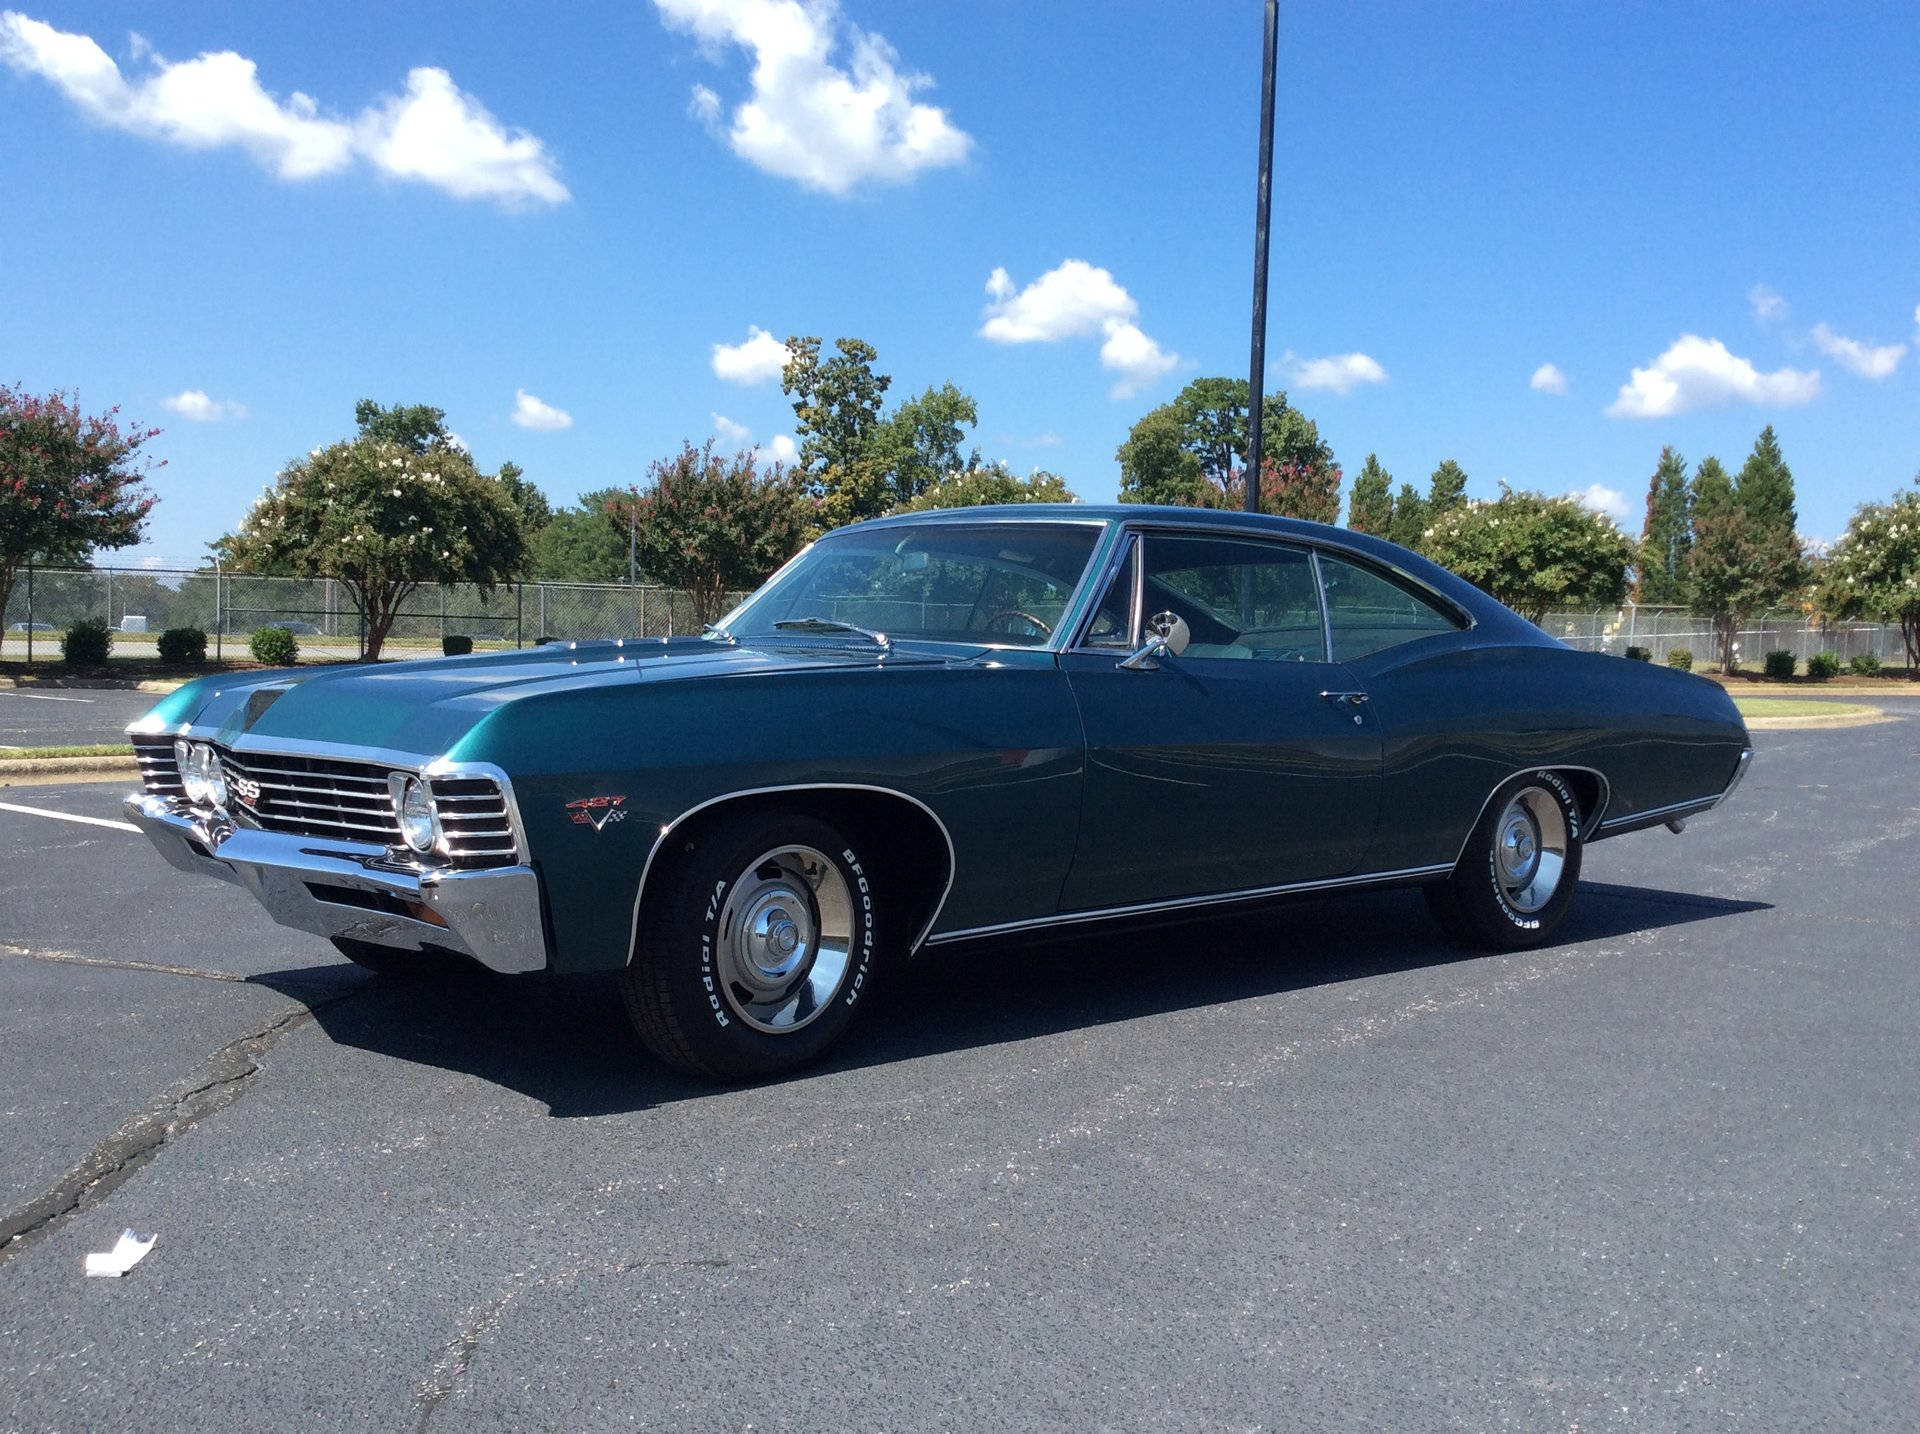 Majestic Turquoise Chevrolet Impala 1967 in All Its Glory Wallpaper